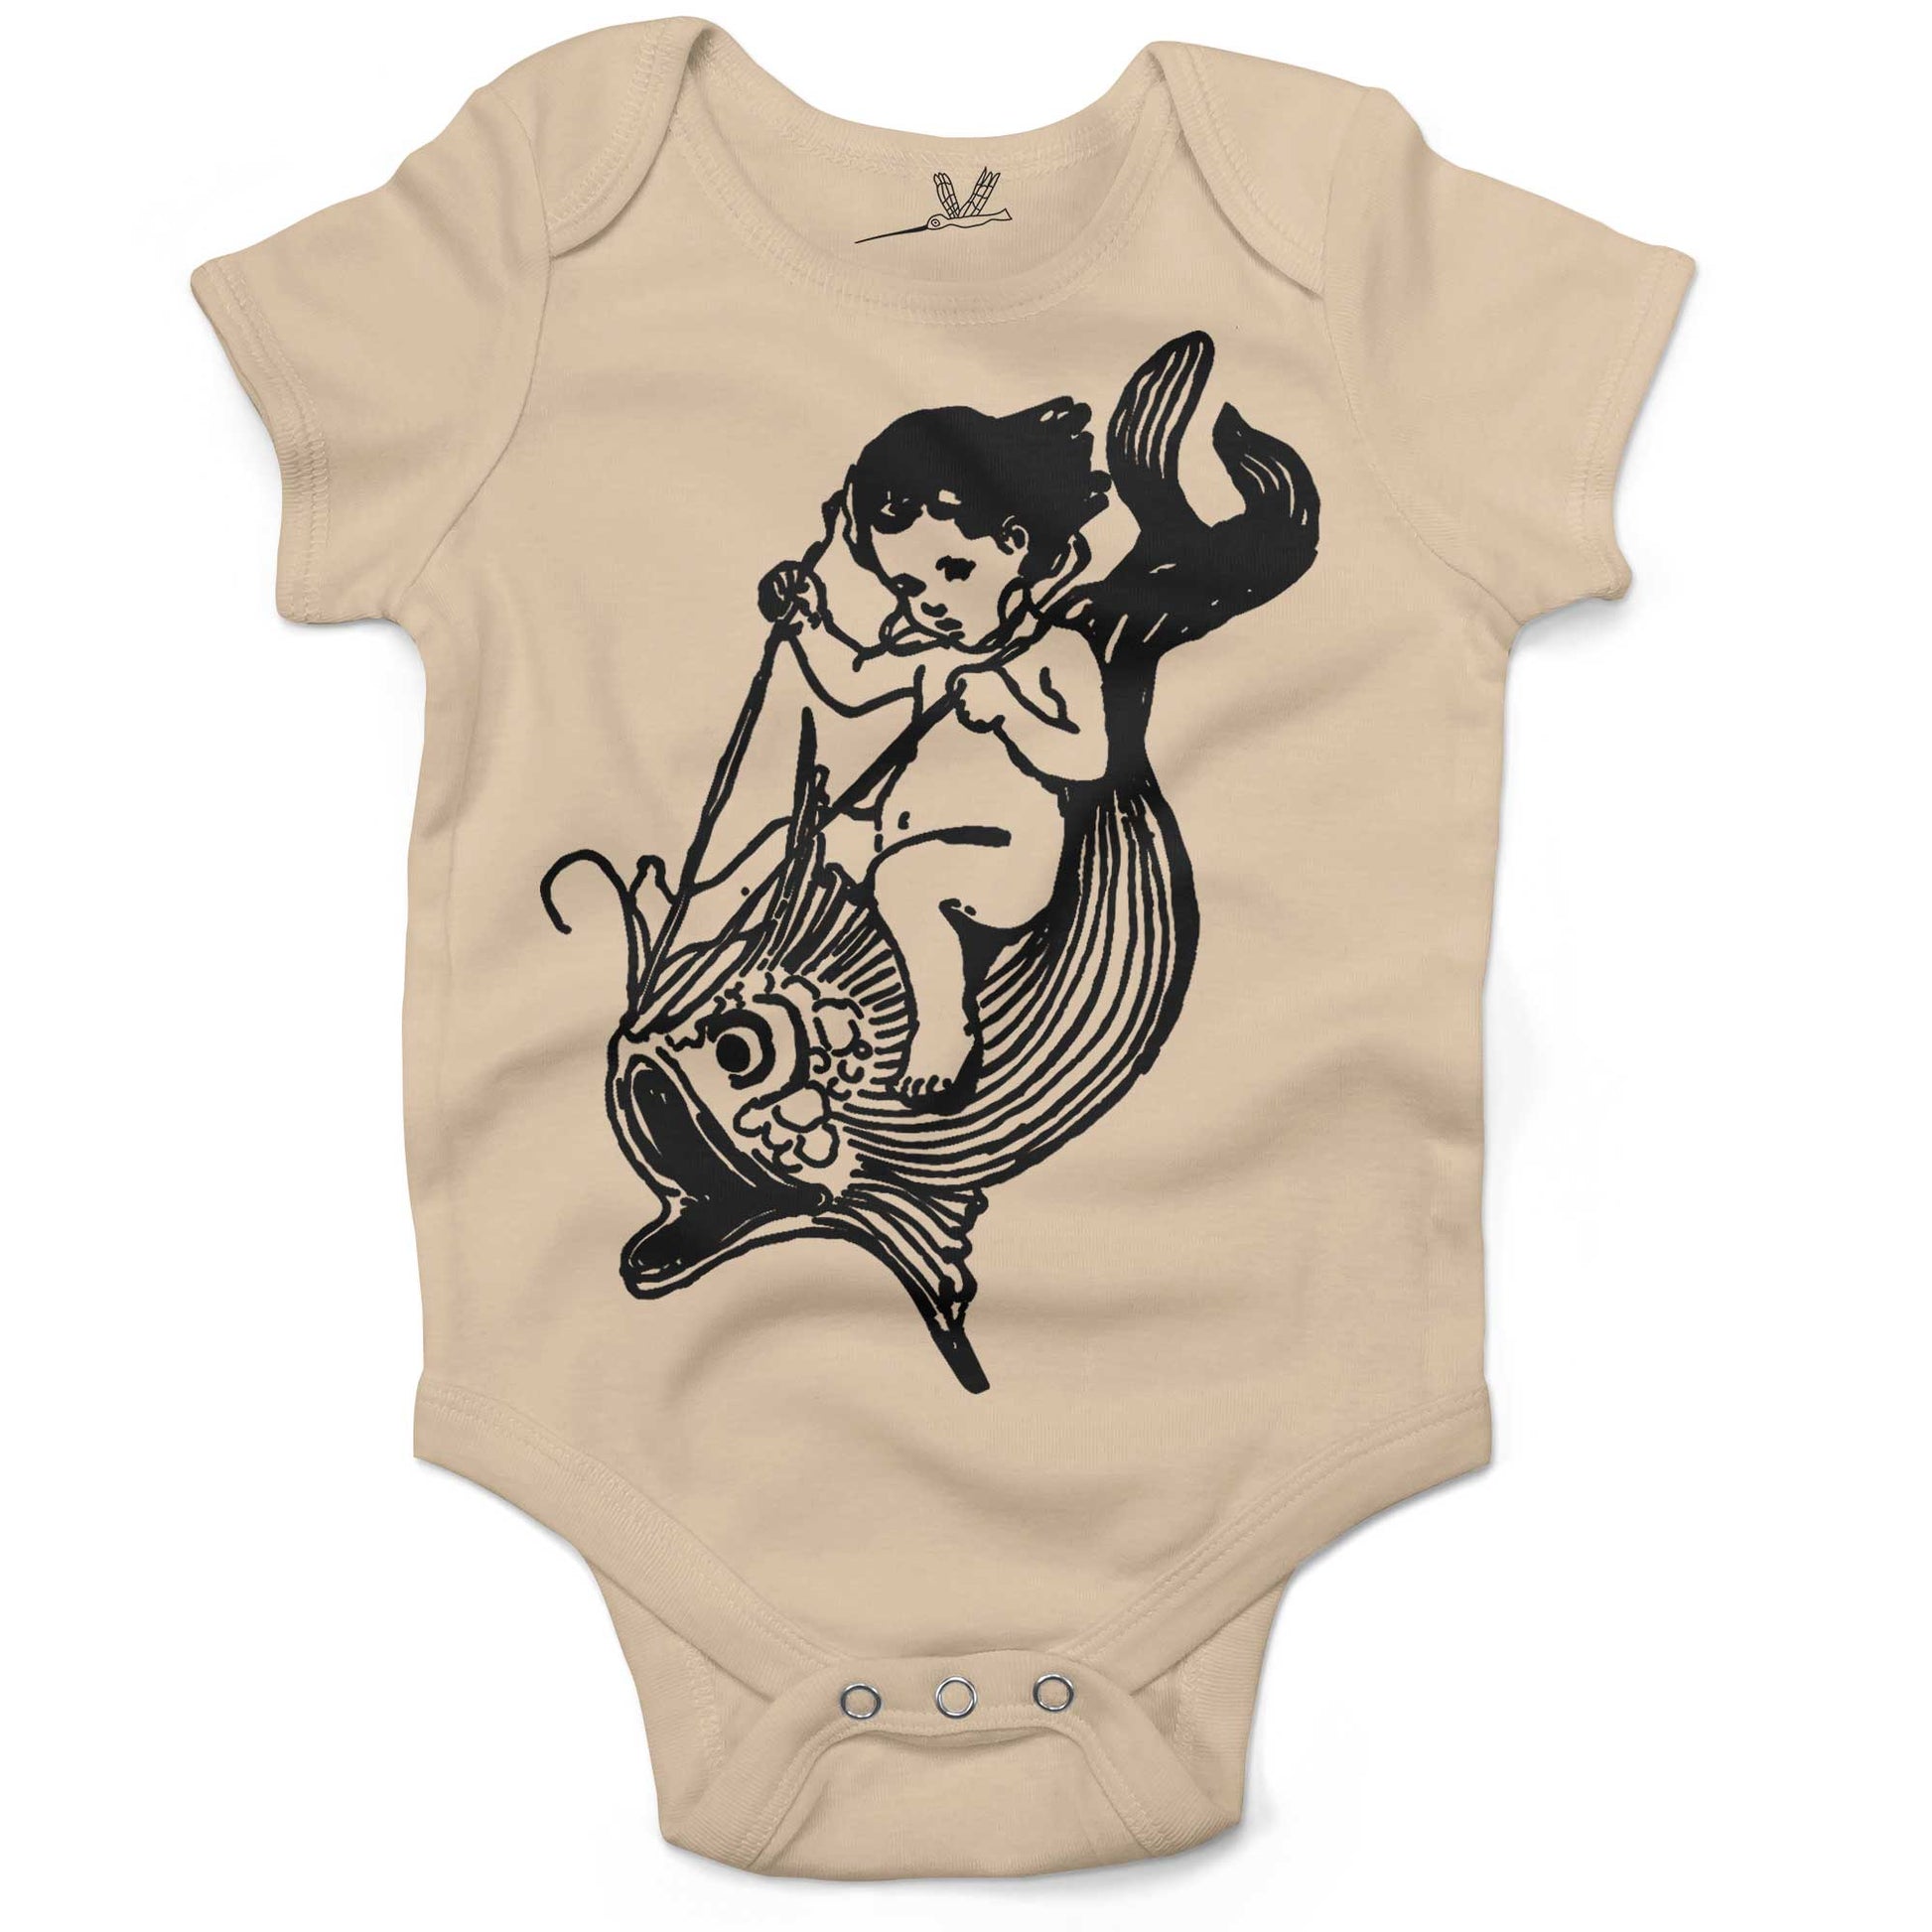 Water Baby Riding A Giant Fish Infant Bodysuit or Raglan Tee-Organic Natural-3-6 months